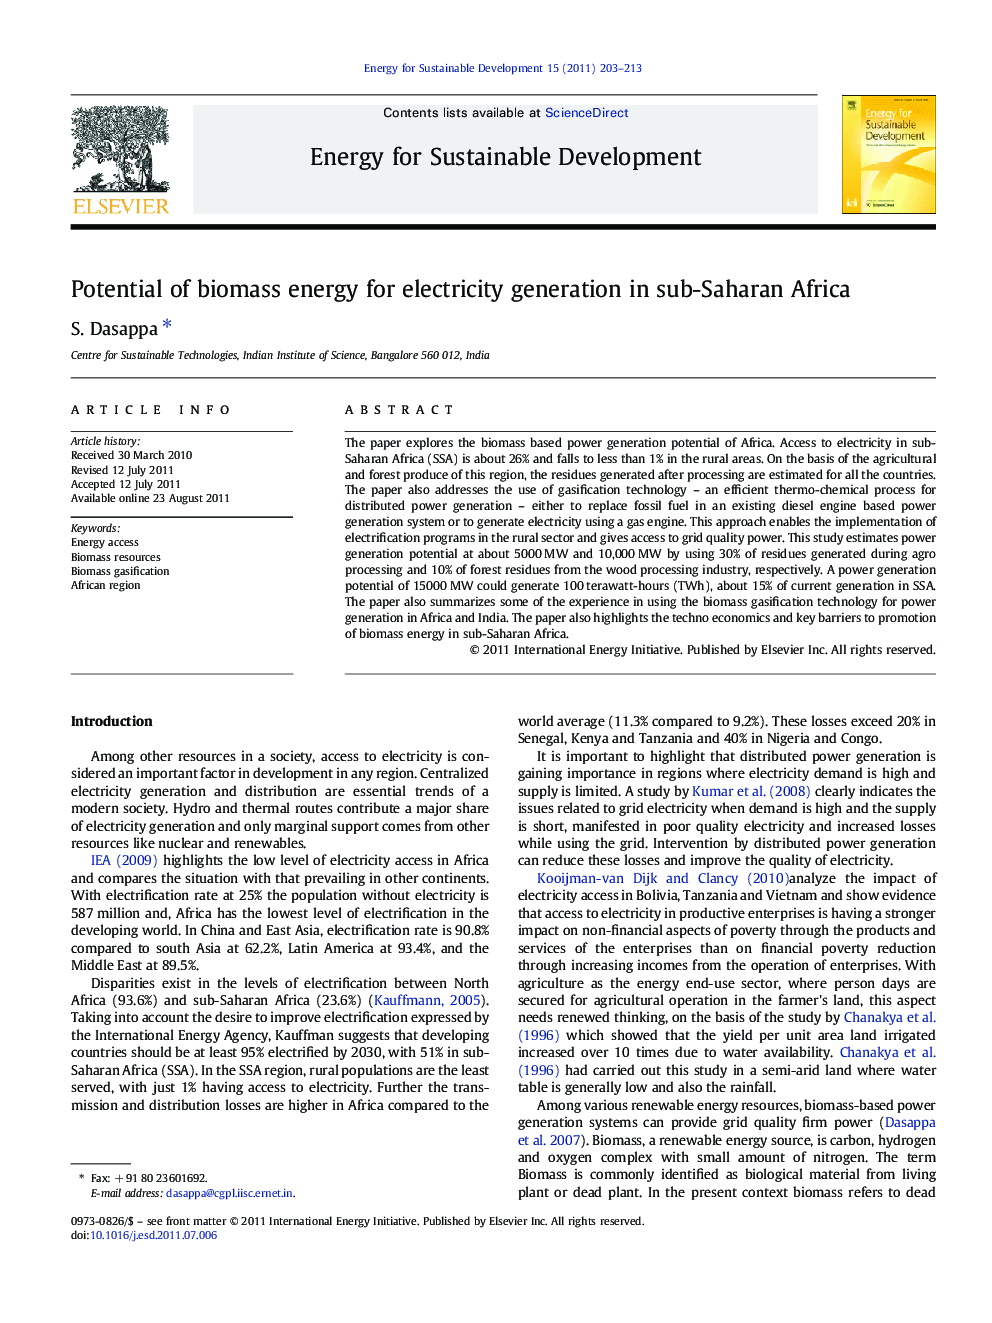 Potential of biomass energy for electricity generation in sub-Saharan Africa